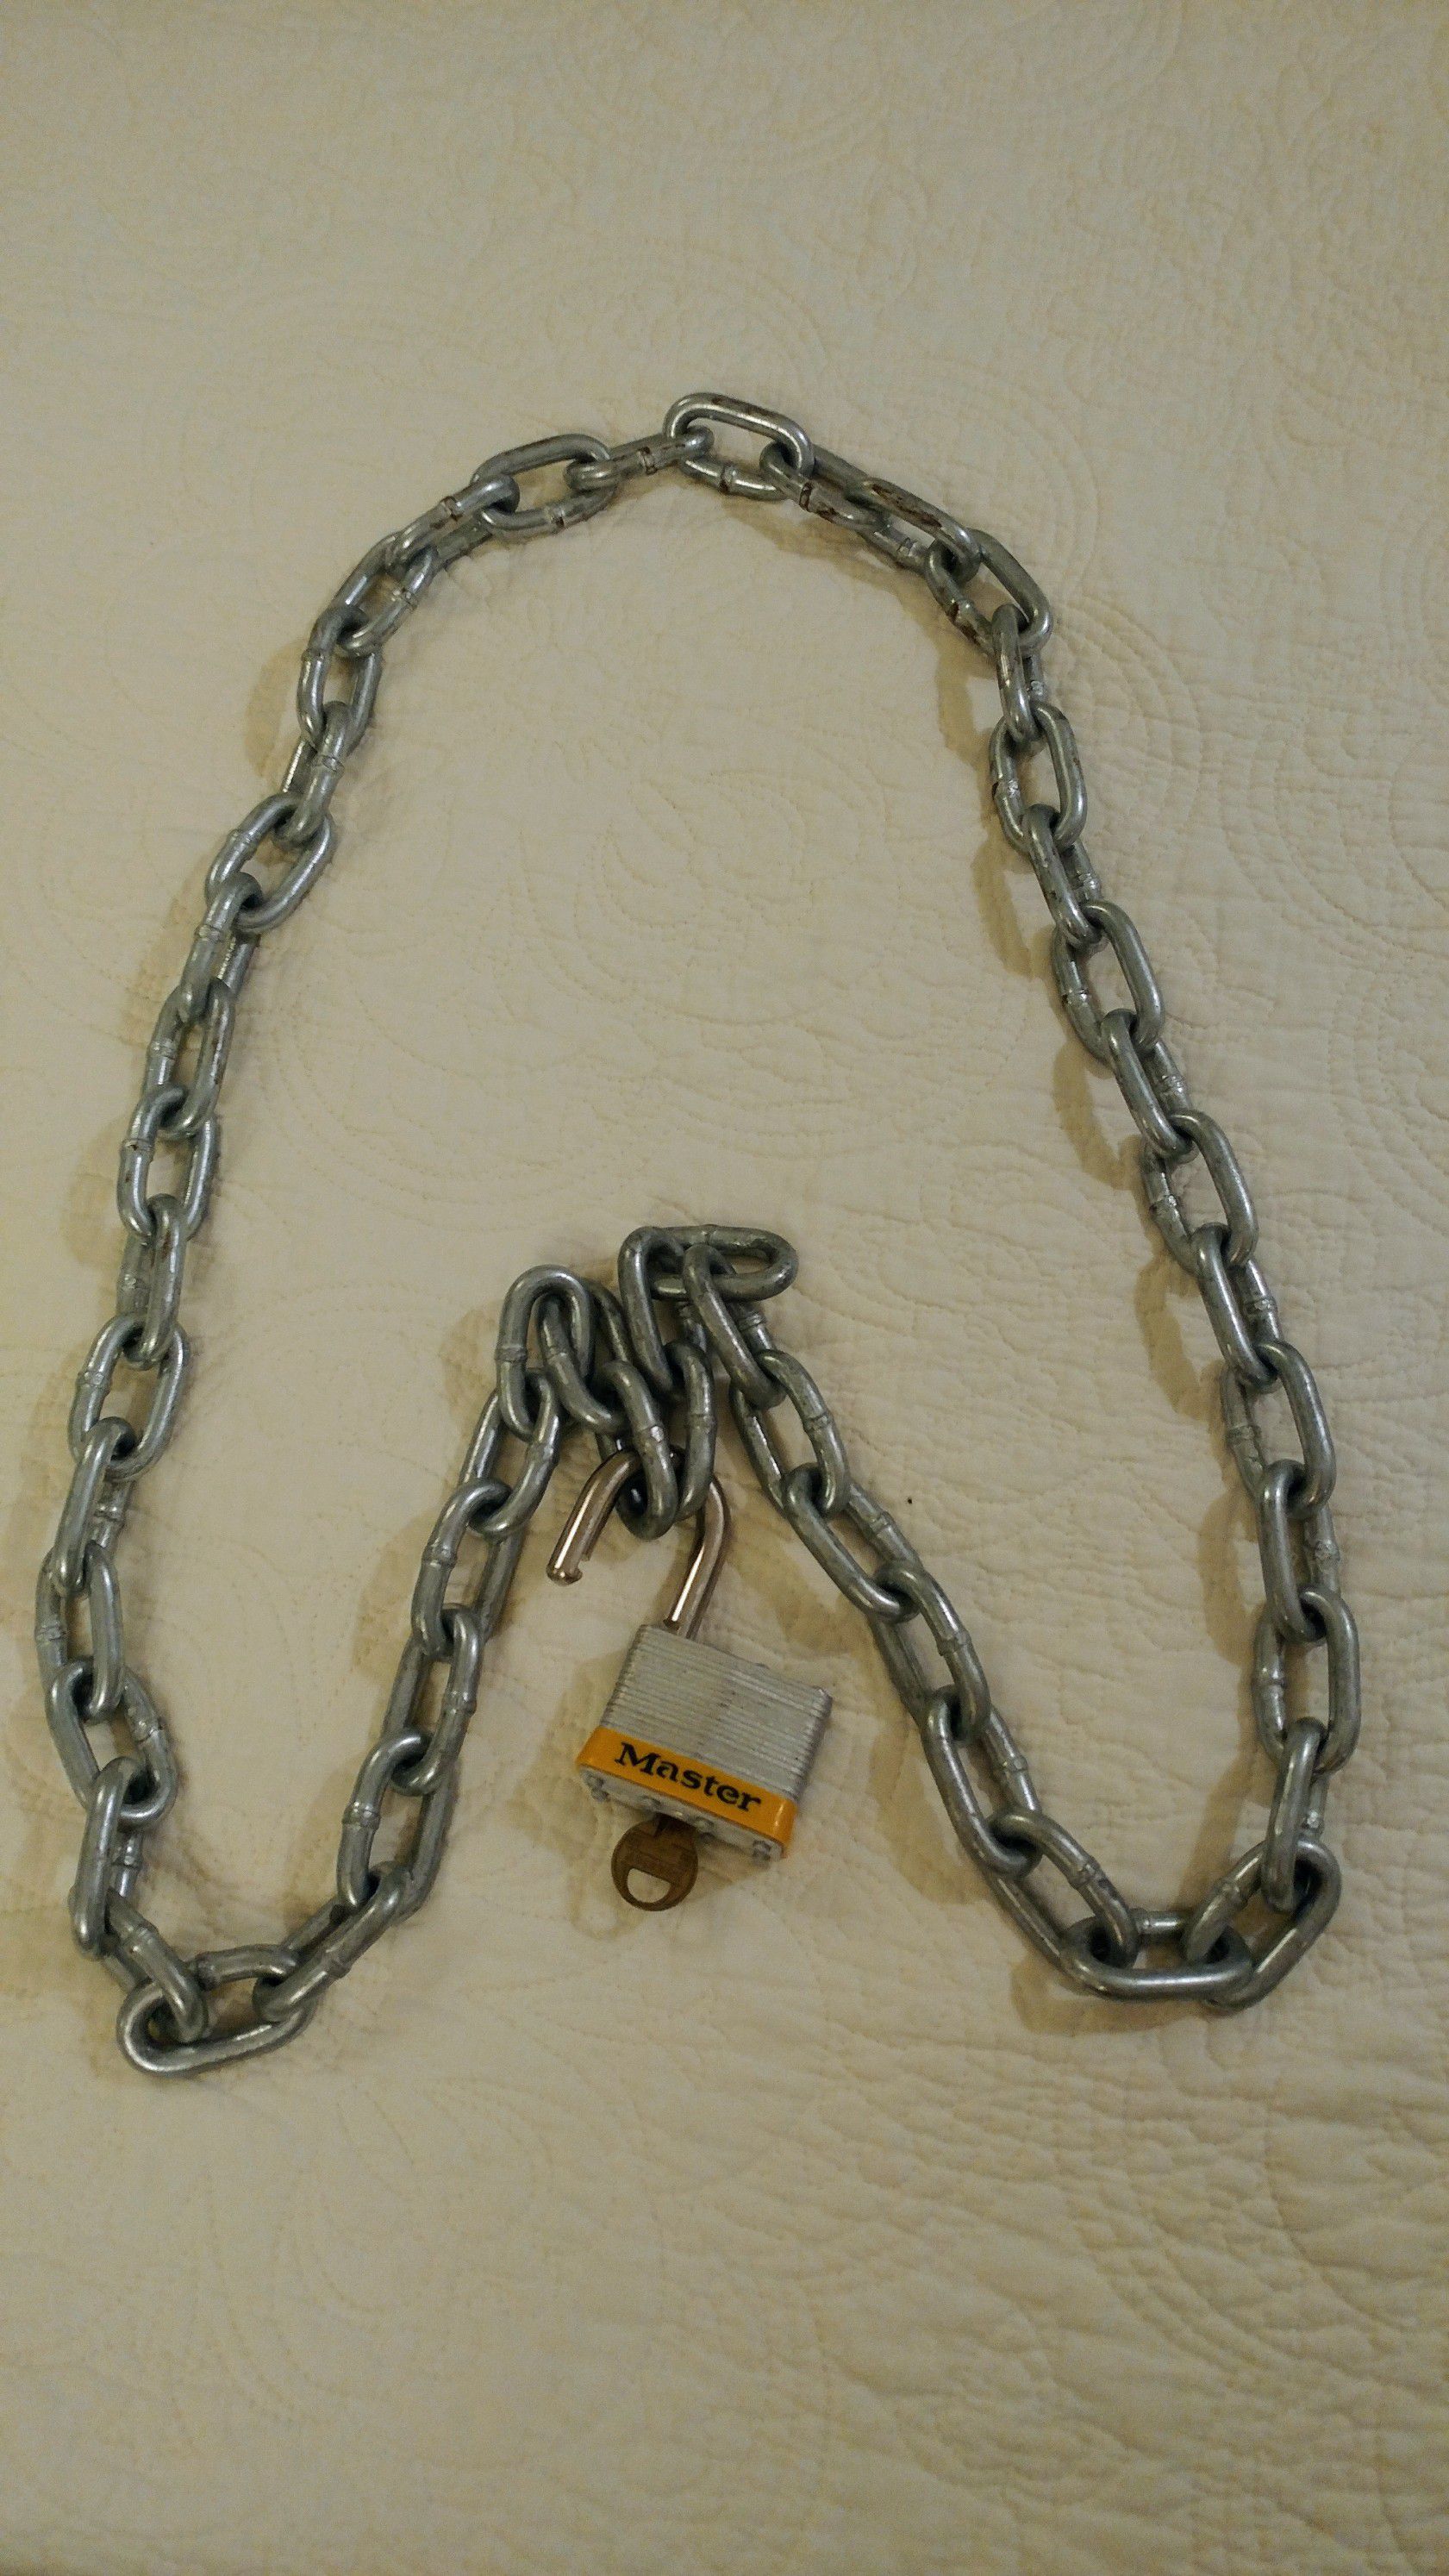 Heavy chain 6 foot and lock